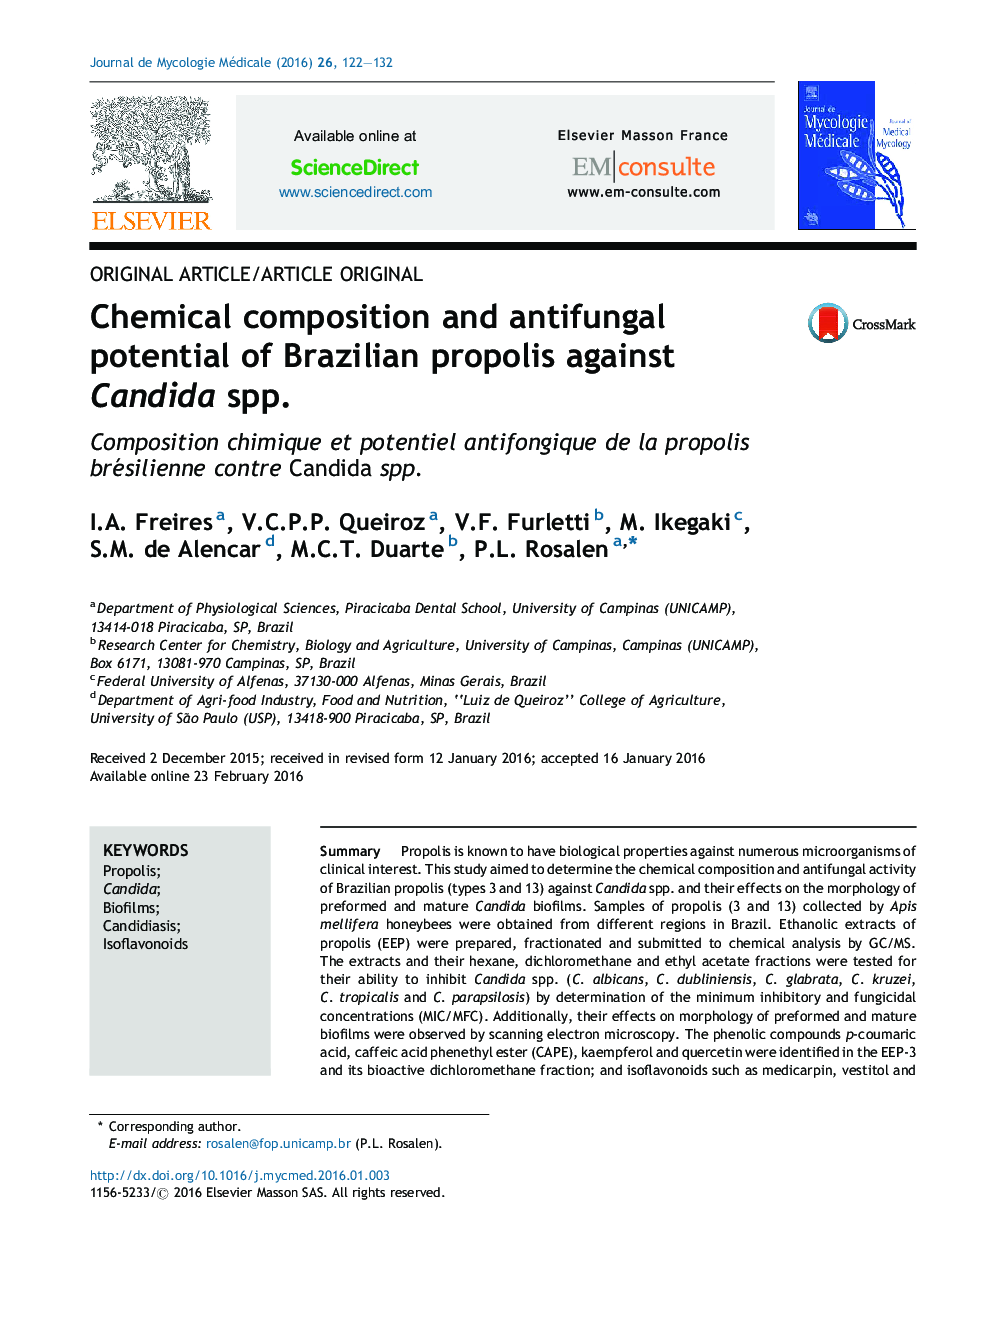 Chemical composition and antifungal potential of Brazilian propolis against Candida spp.